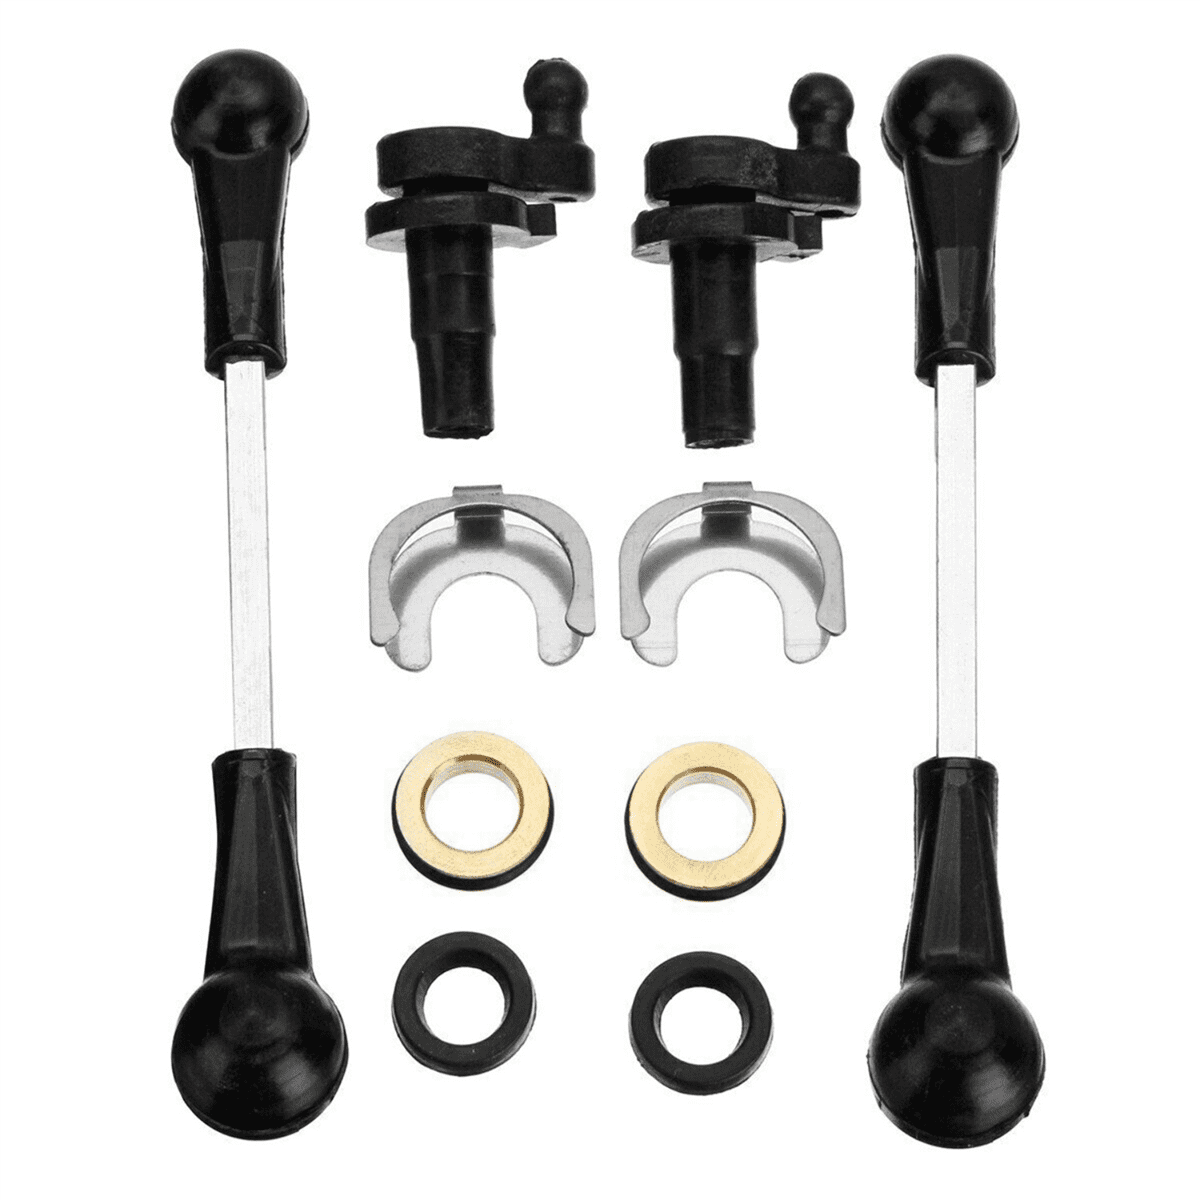 20Pcs 2.7 3.0 Tdi Car Air Intake Manifold Suction Pipe Swirl Flap Repair Kit  for A4 A5 A6 A7 A8 for 059198212 